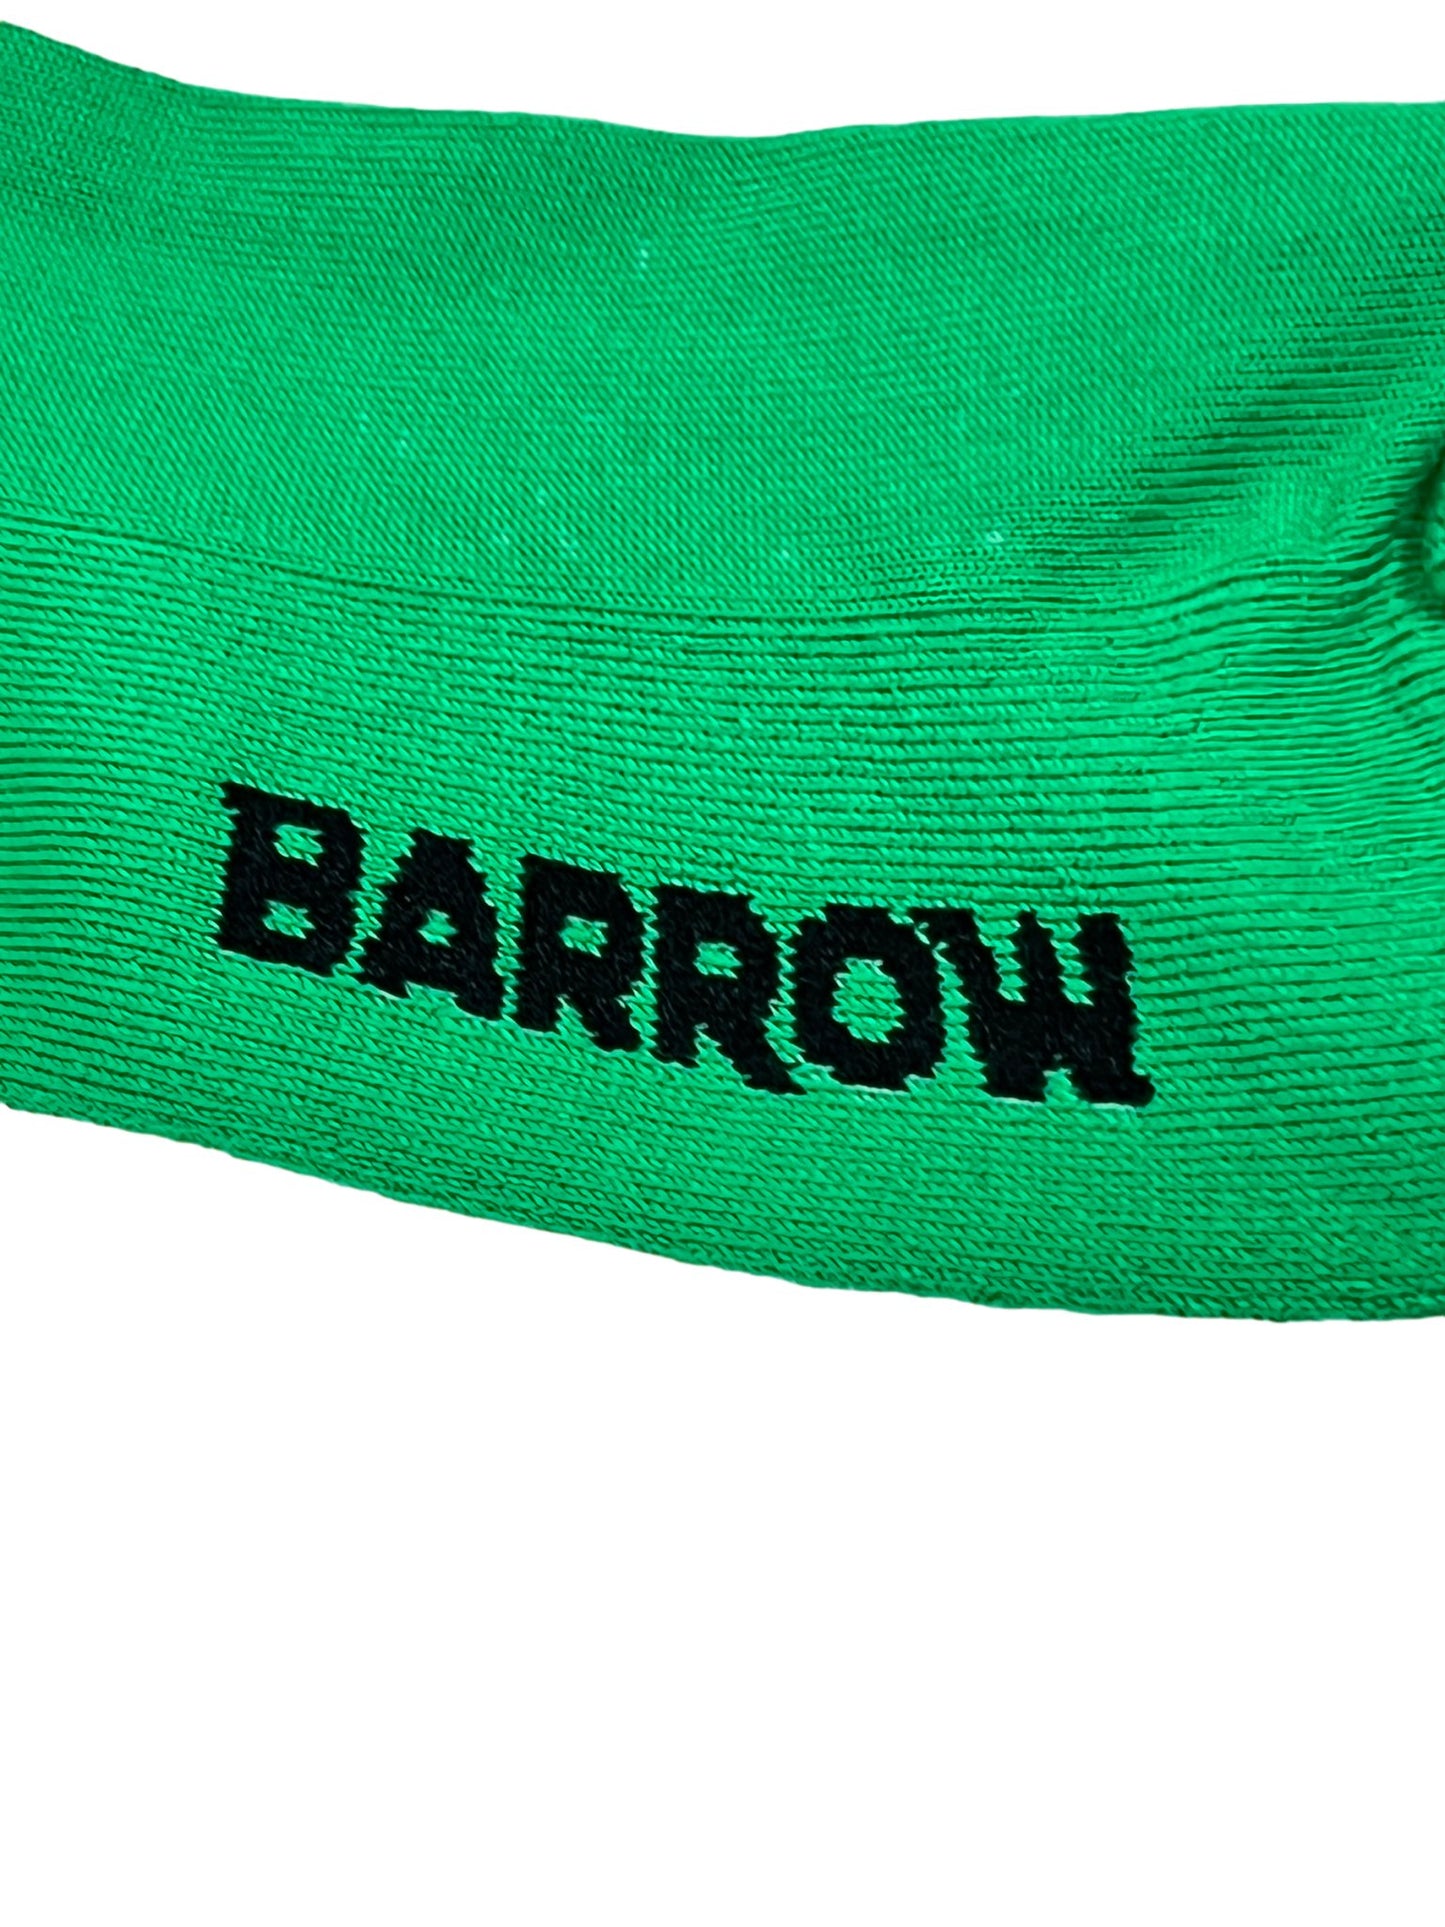 Close-up of green BARROW graphic socks with the word "BARROW" embroidered in black.